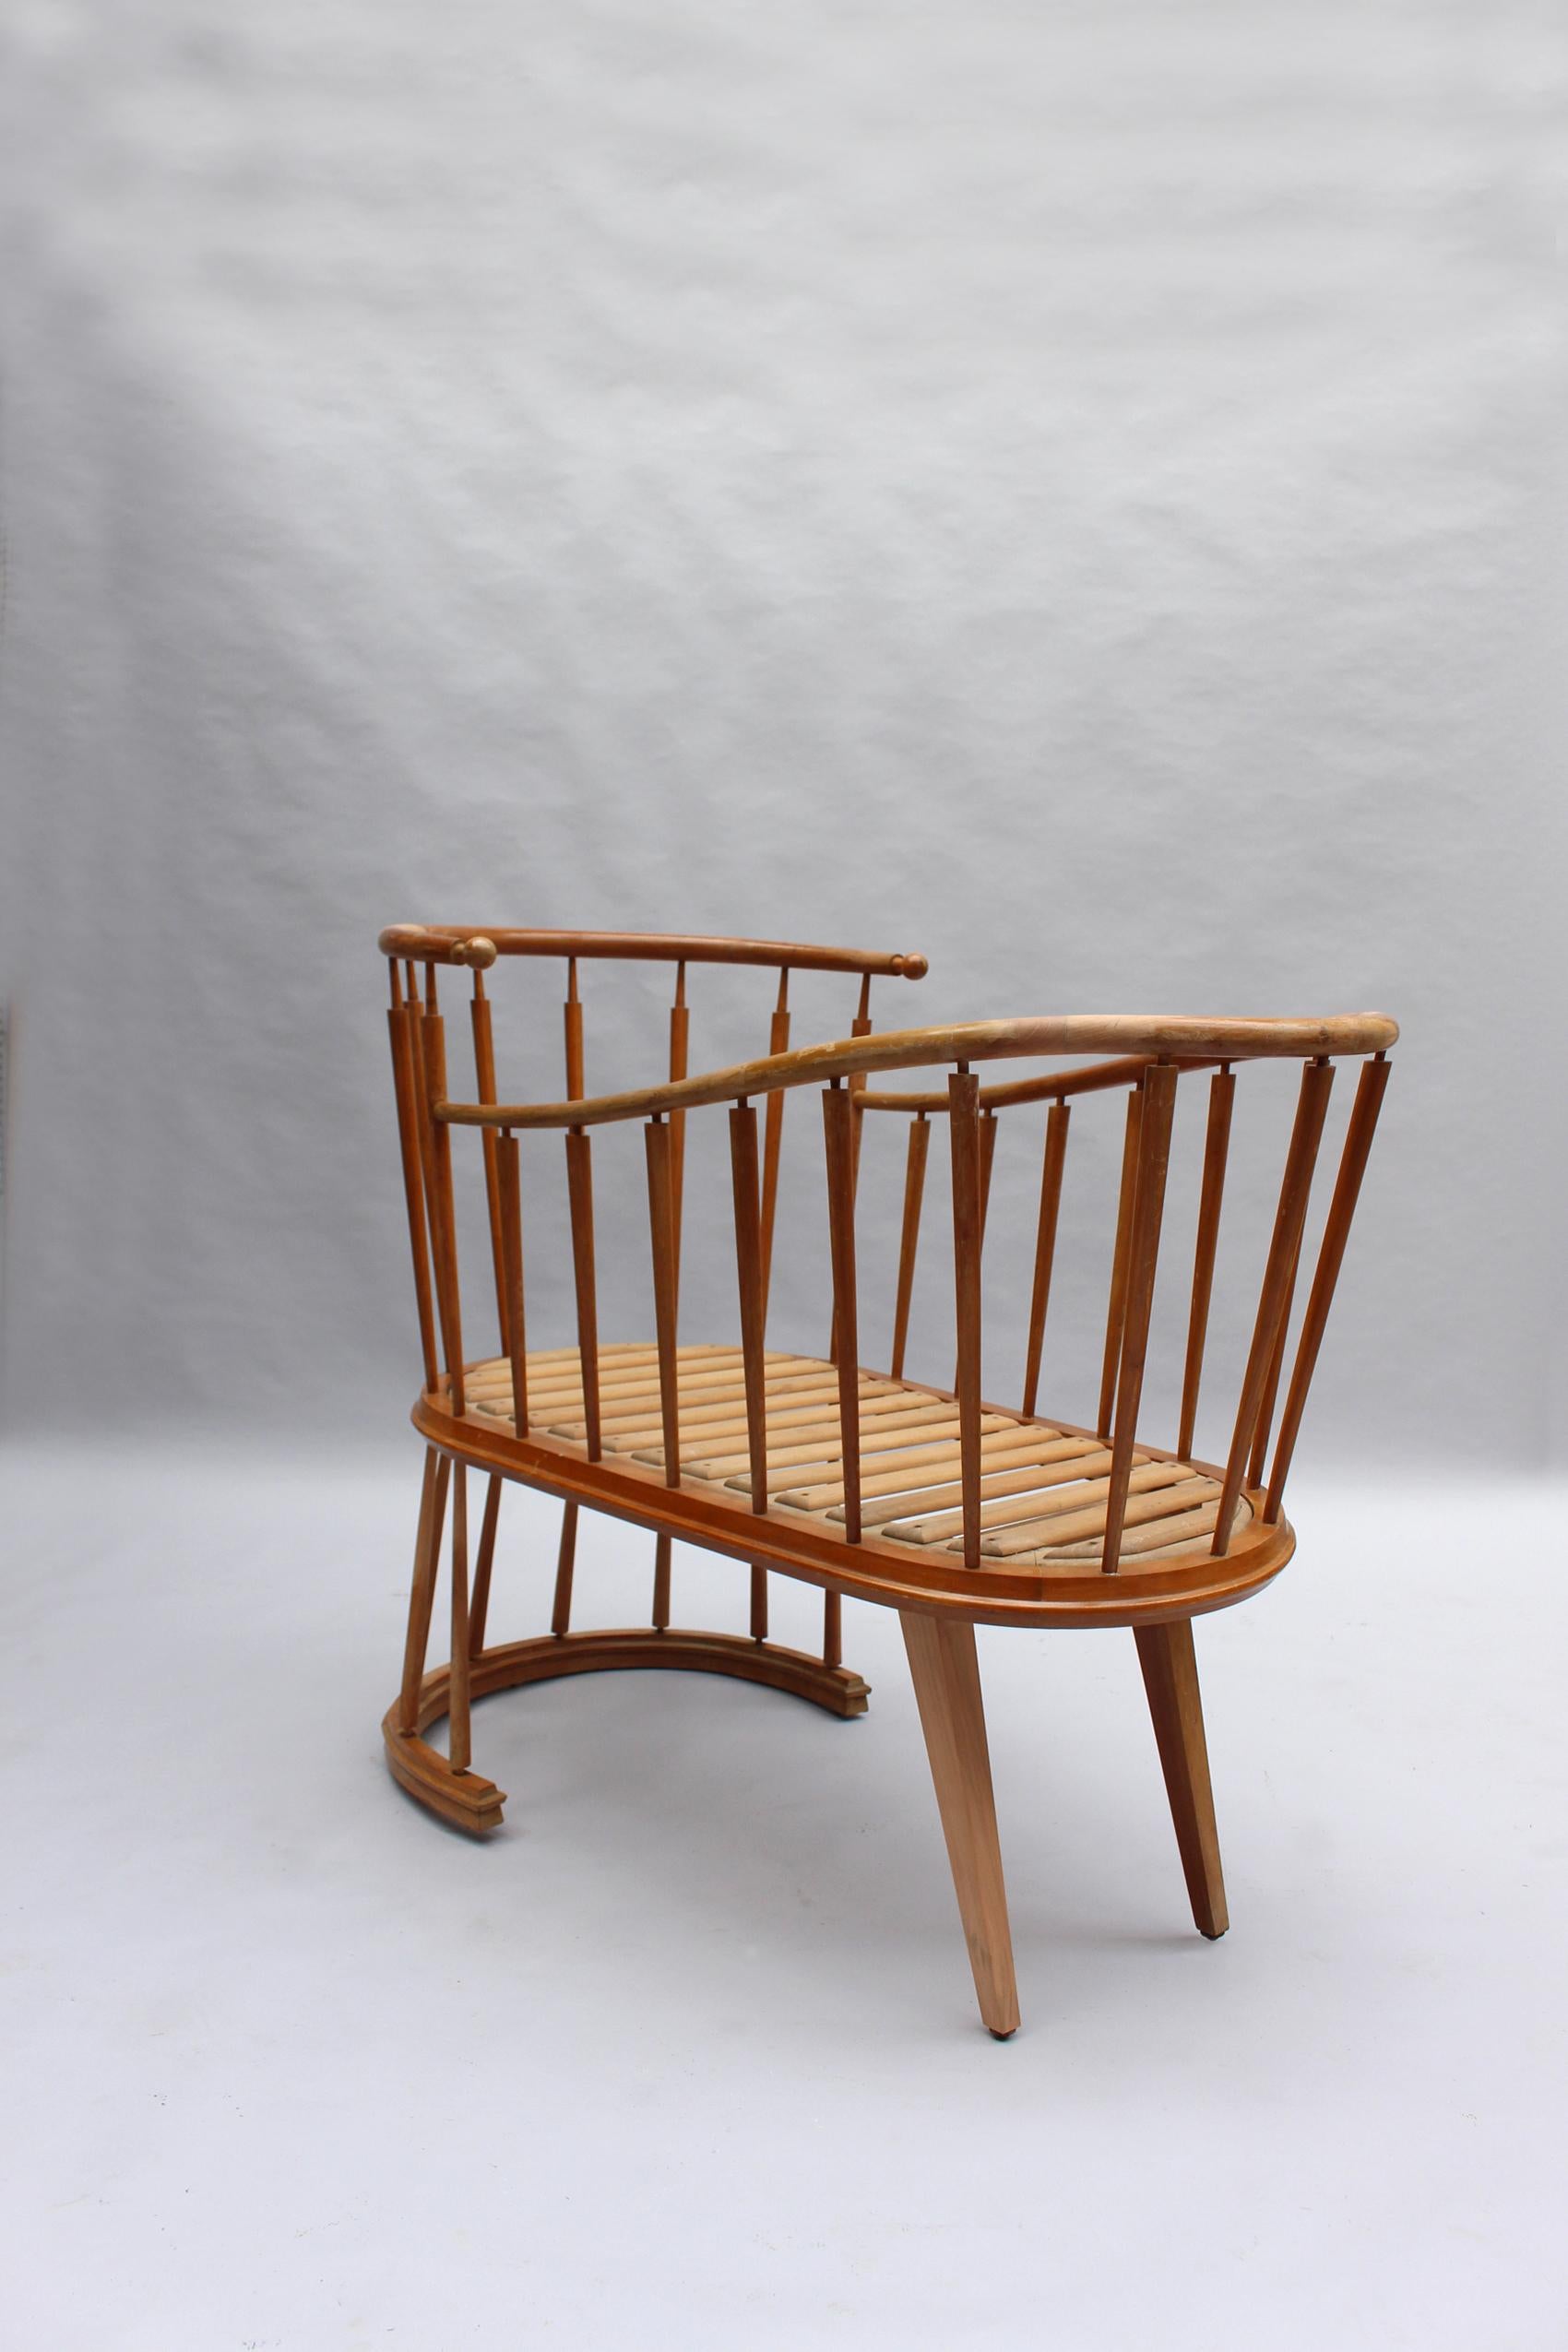 Unique piece, this solid cherry wood cradle was designed by Max Ingrand for his own children.